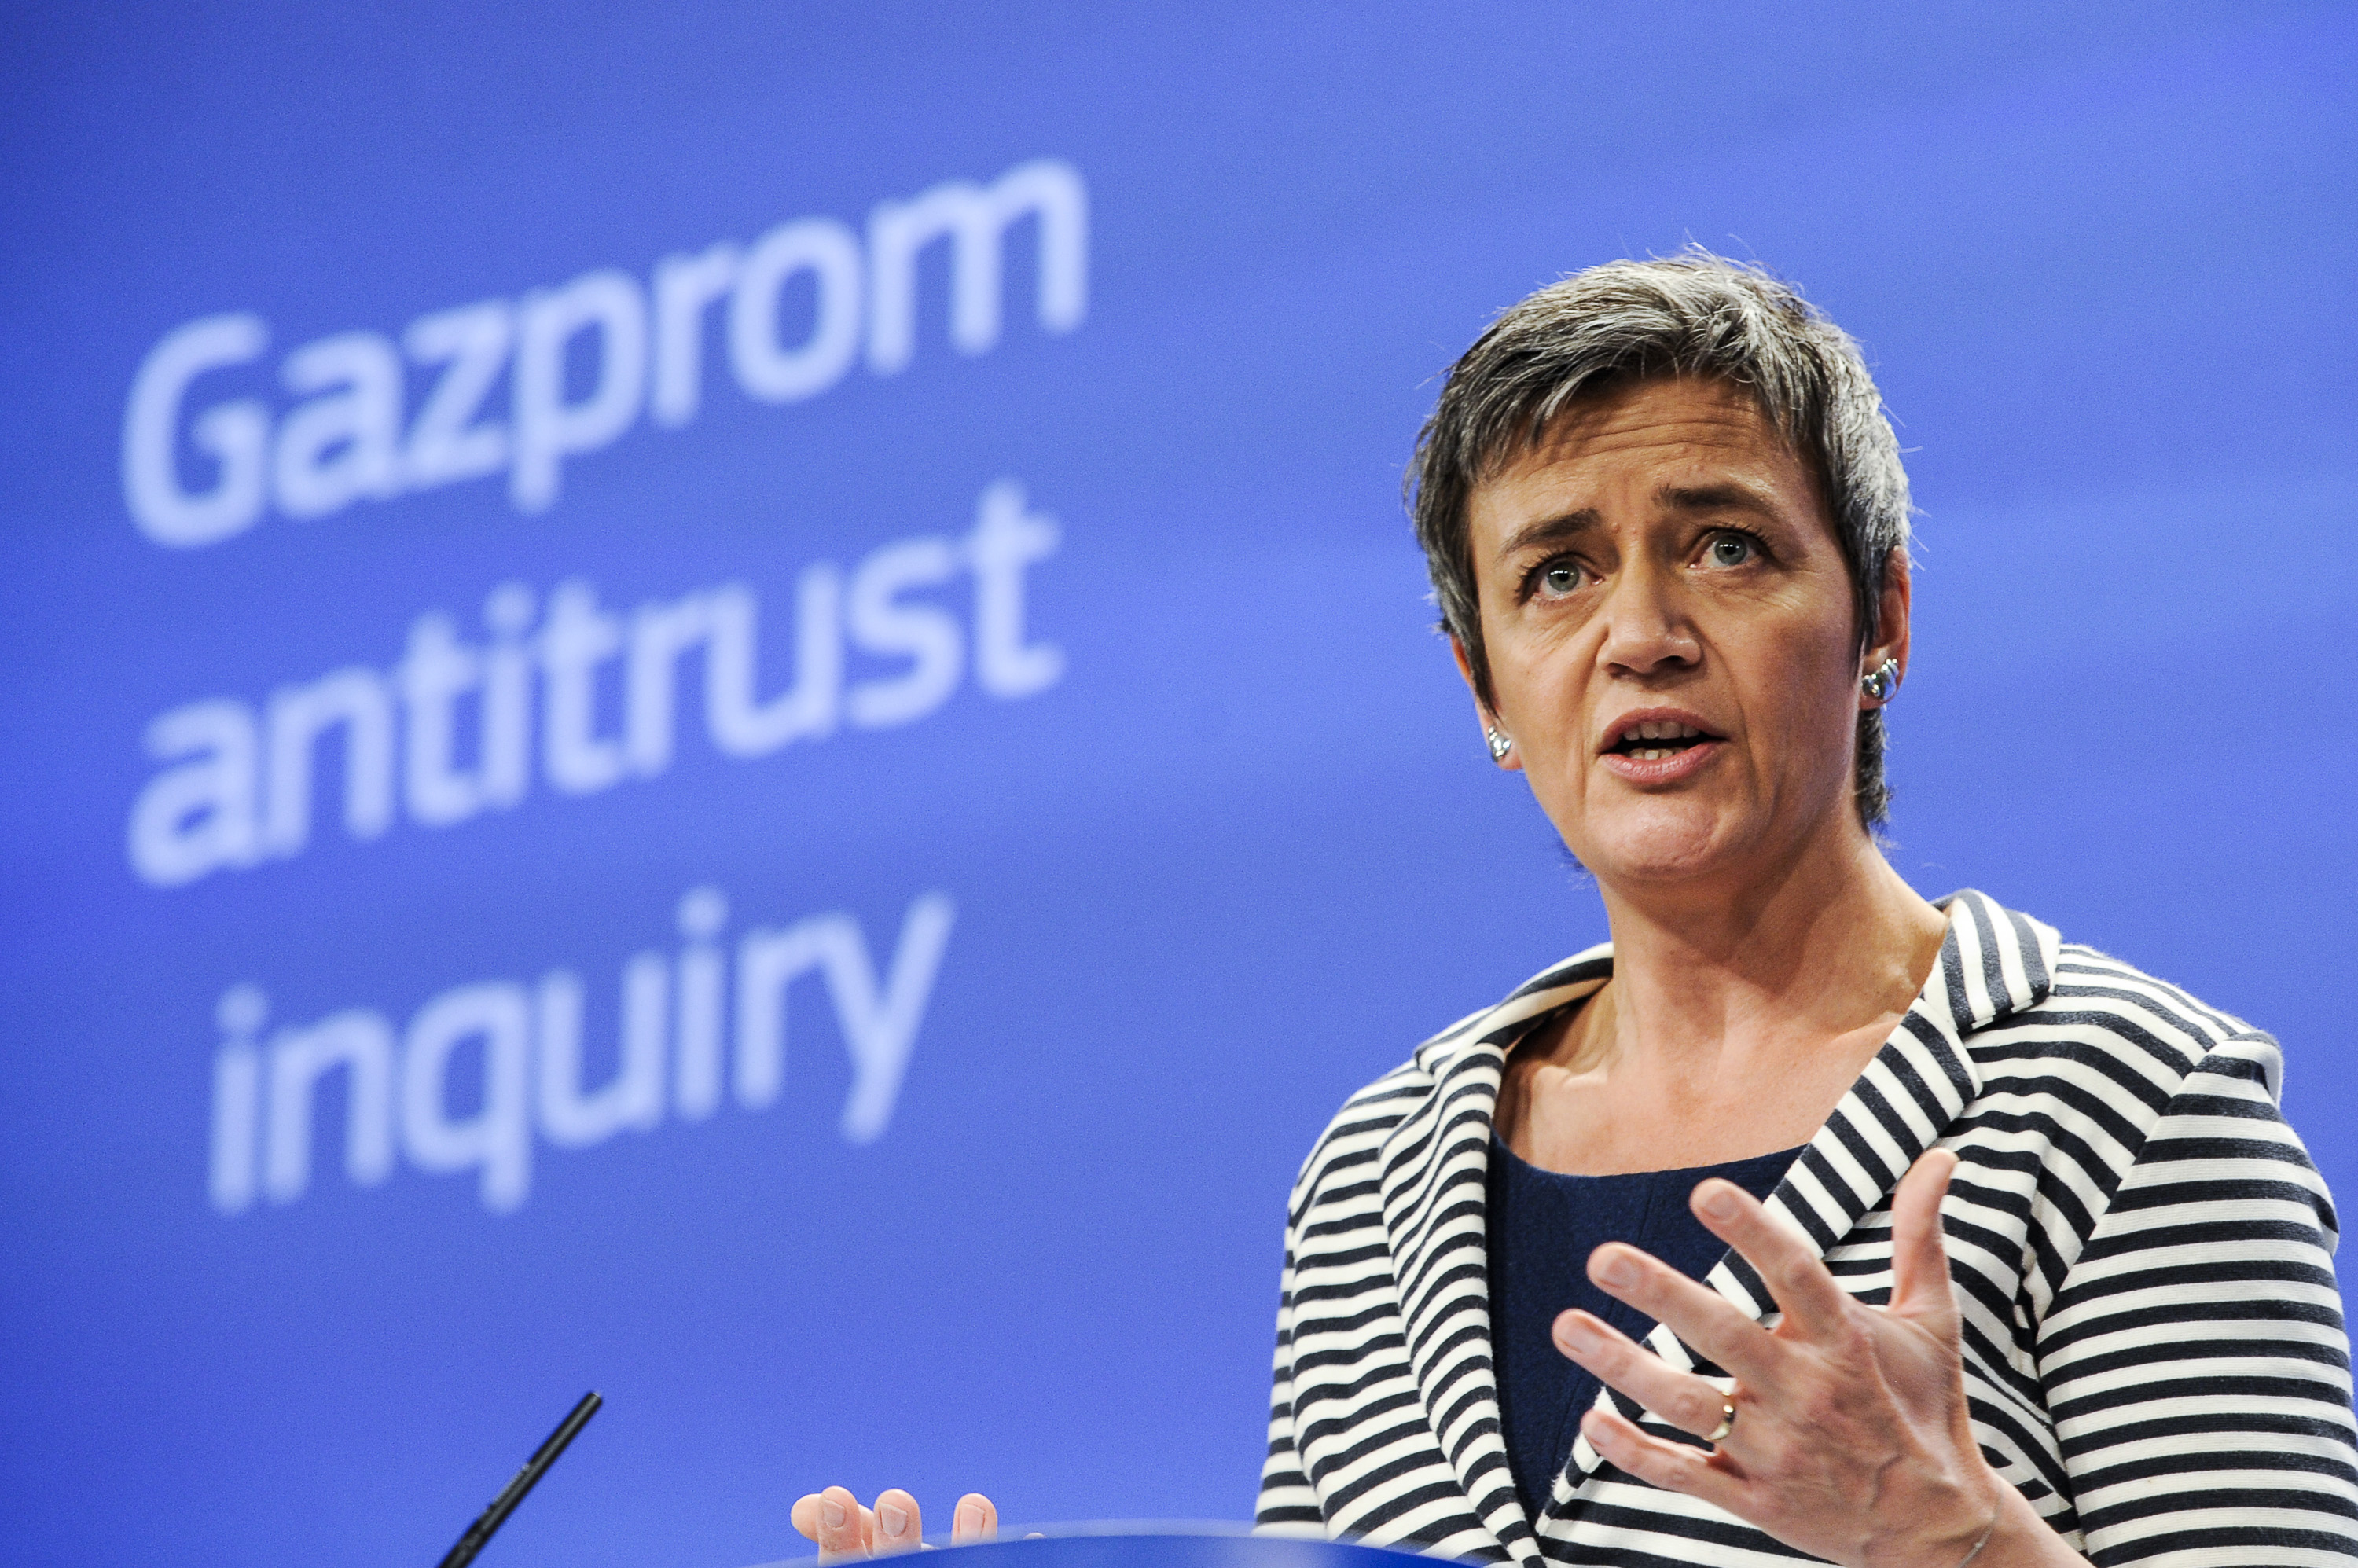 Margrethe Vestager, EU commissioner for Competition announce the Statement of Objection against Gazprom activities in 8 countries during the press conference at European Commission headquarters in Brussels, April 22, 2015. (Wiktor Dabkowski—picture-alliance/DPA/AP)